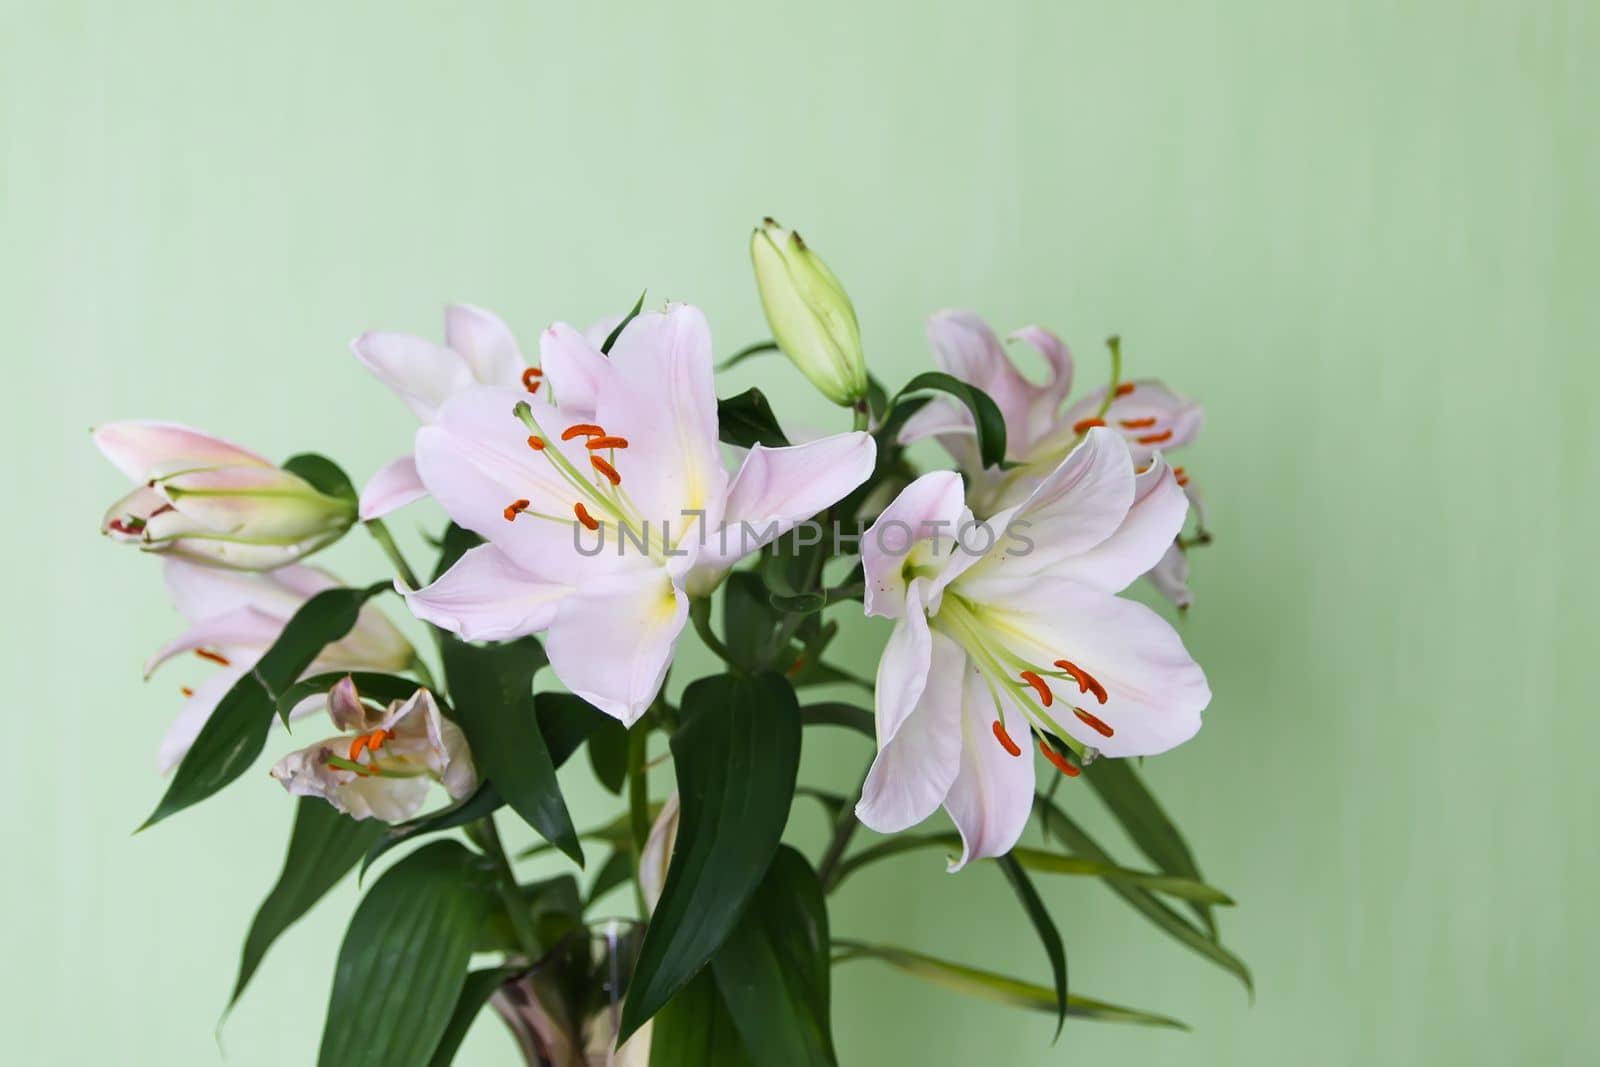 Beautiful white lily flowers in a bouquet. Elegant floral decor.